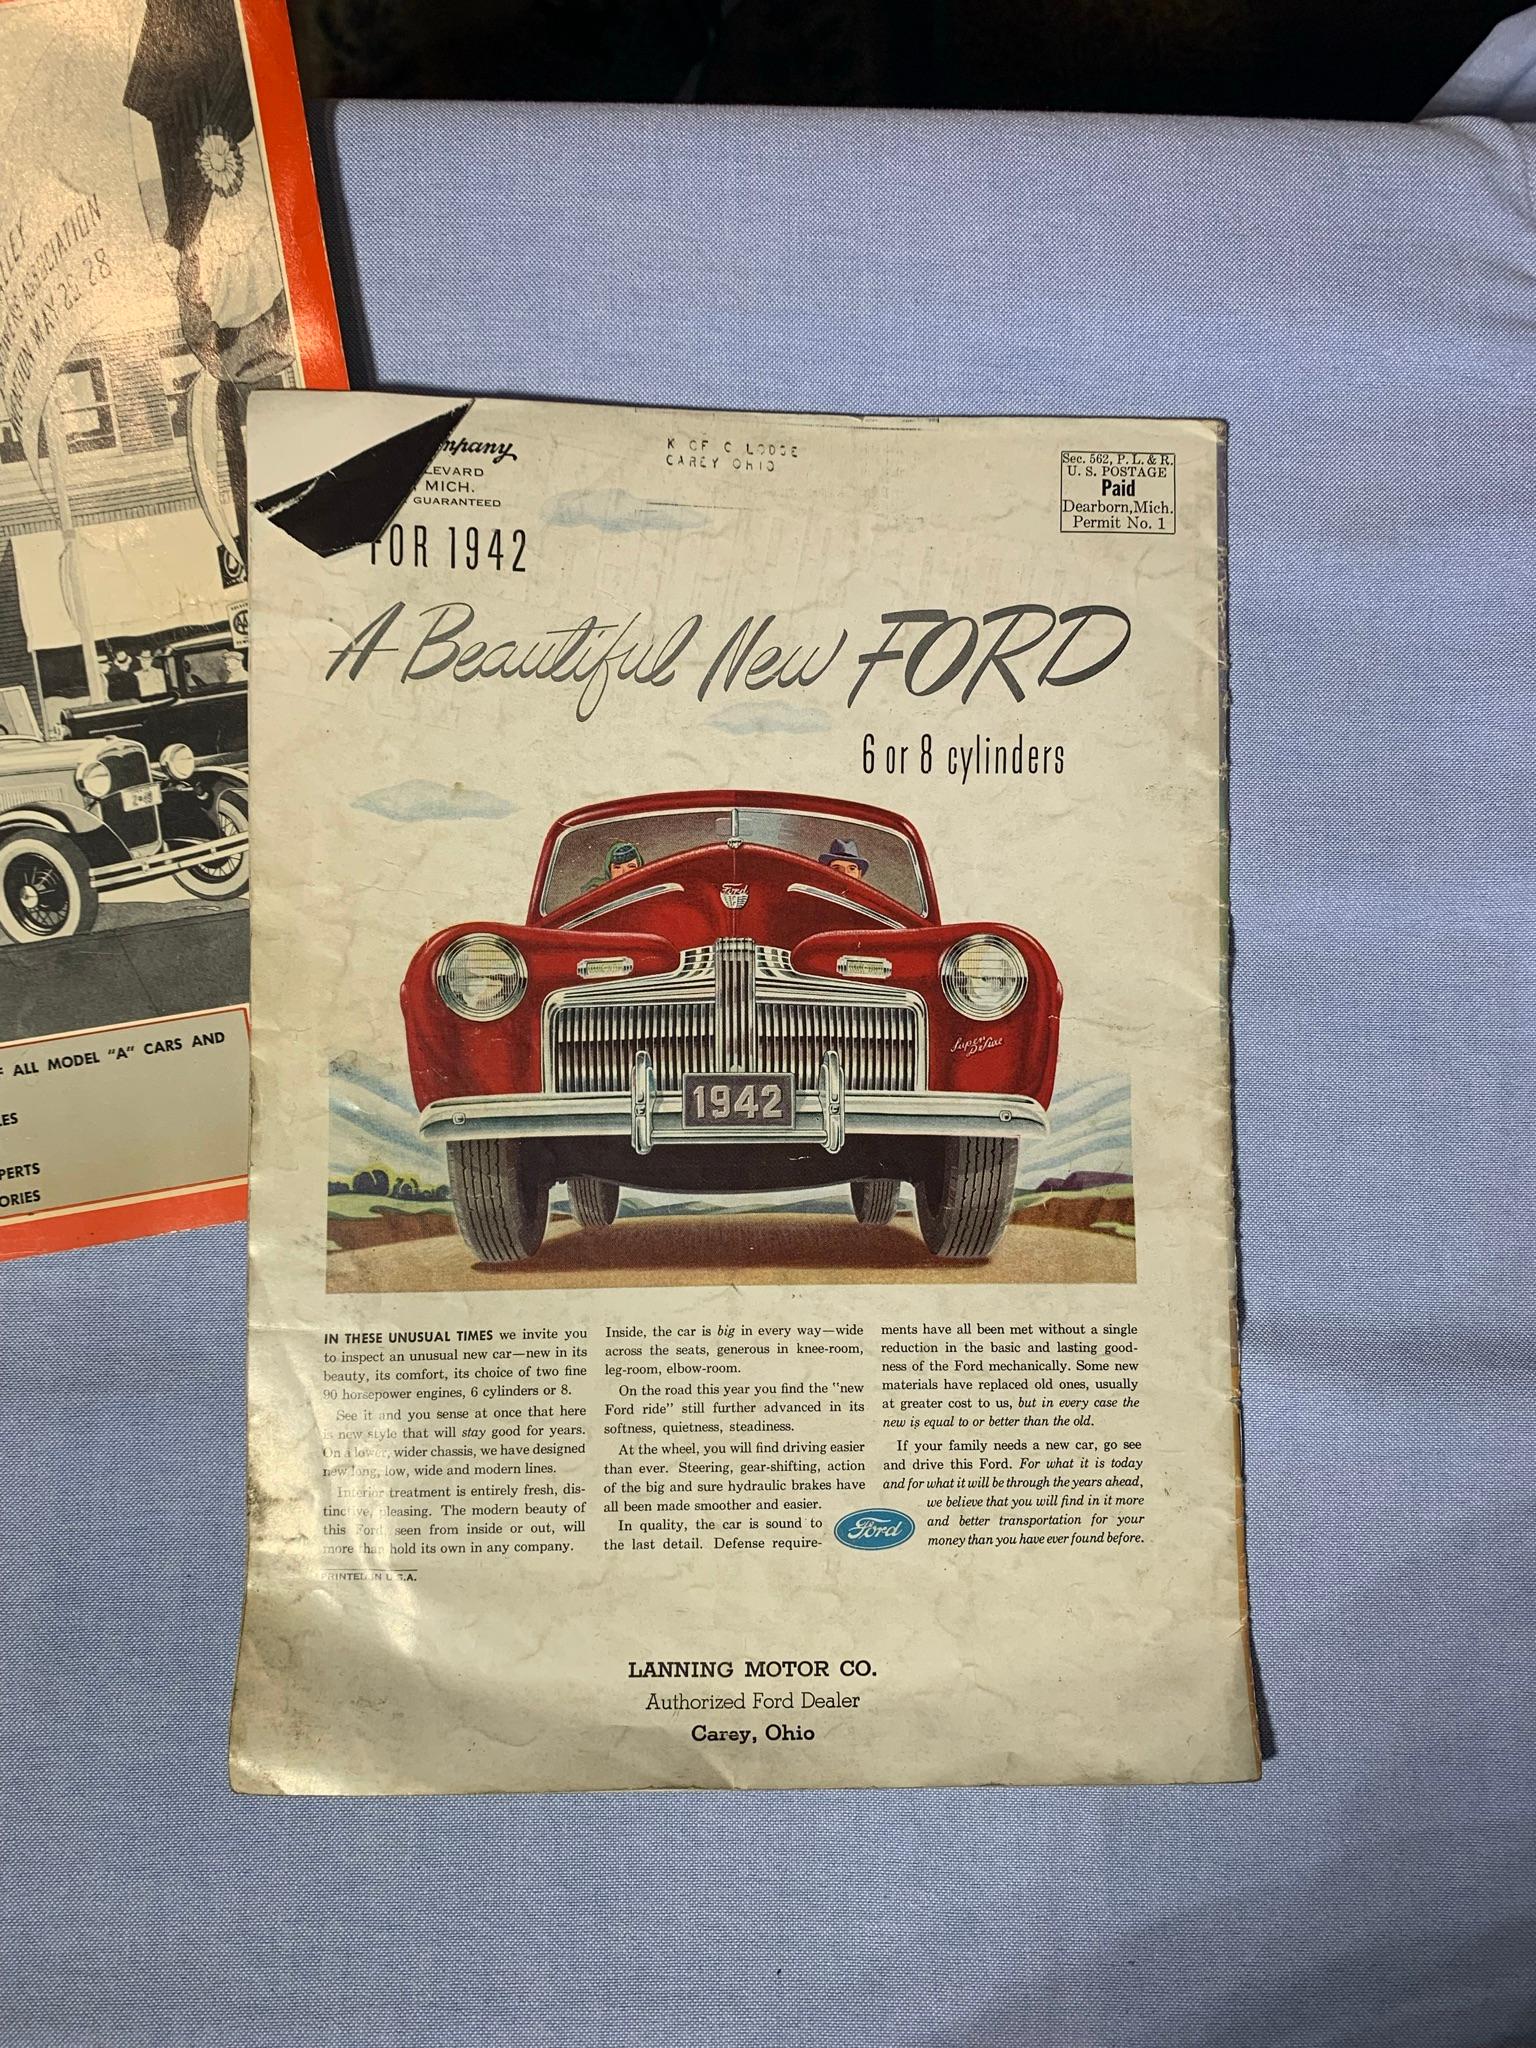 Early Ford Model "A" Album, 1949 Ford Brochure and Early Ford News Magazine